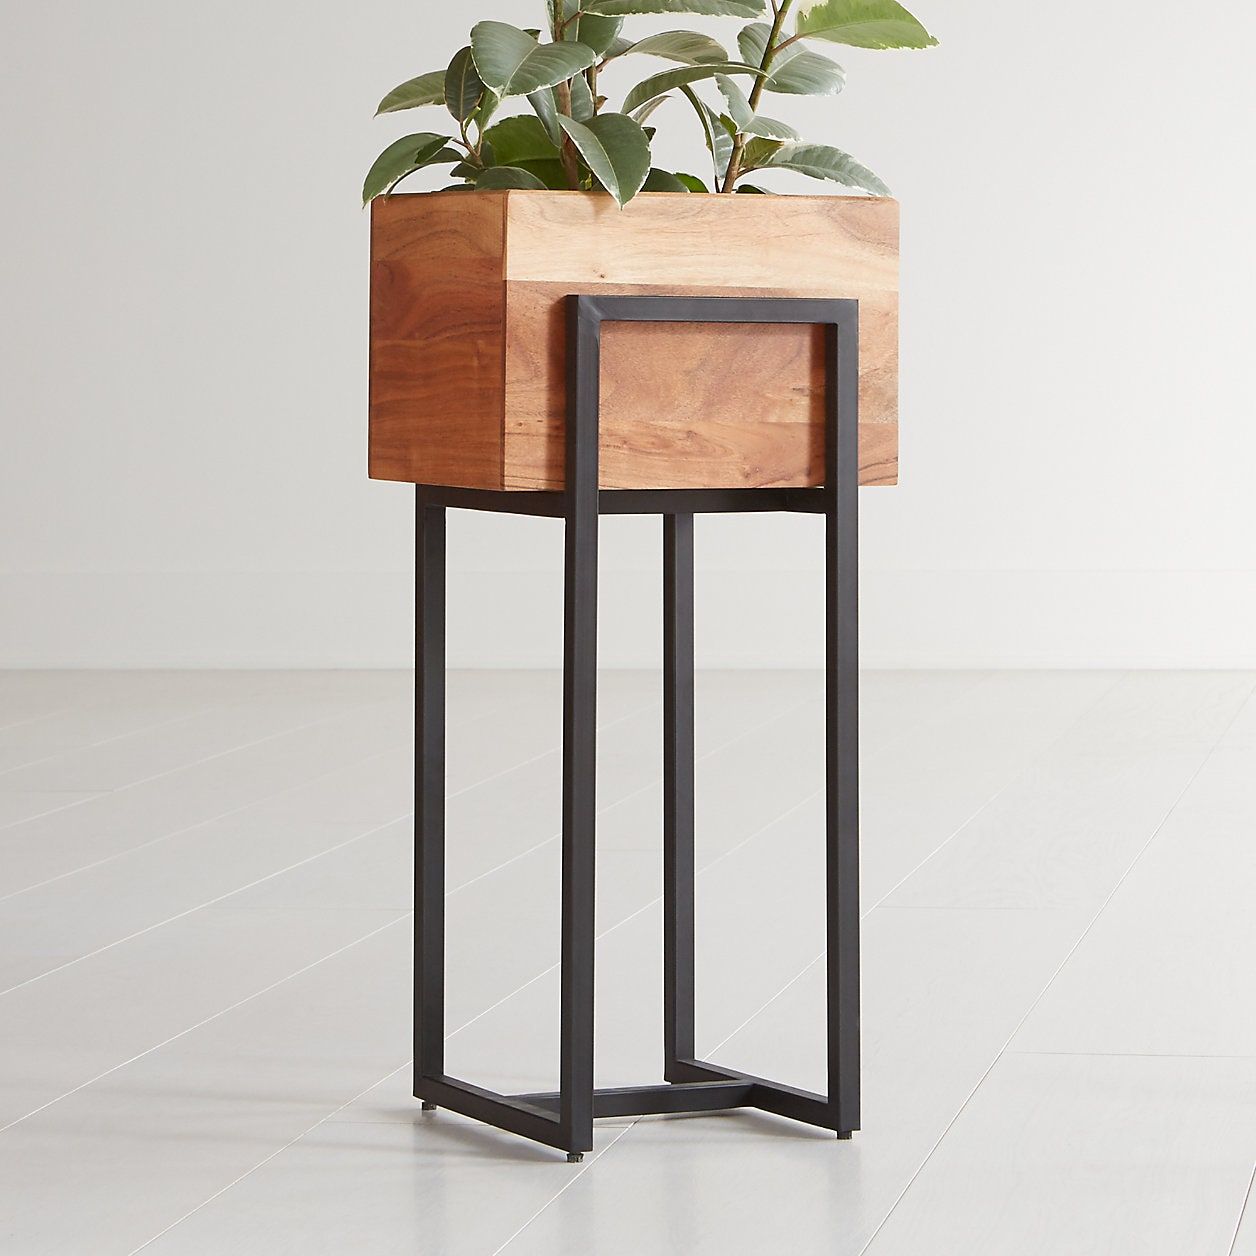 15 Best Indoor Plant Stands That Seriously Stand Out | Architectural Digest With Regard To Modern Plant Stands (View 9 of 15)